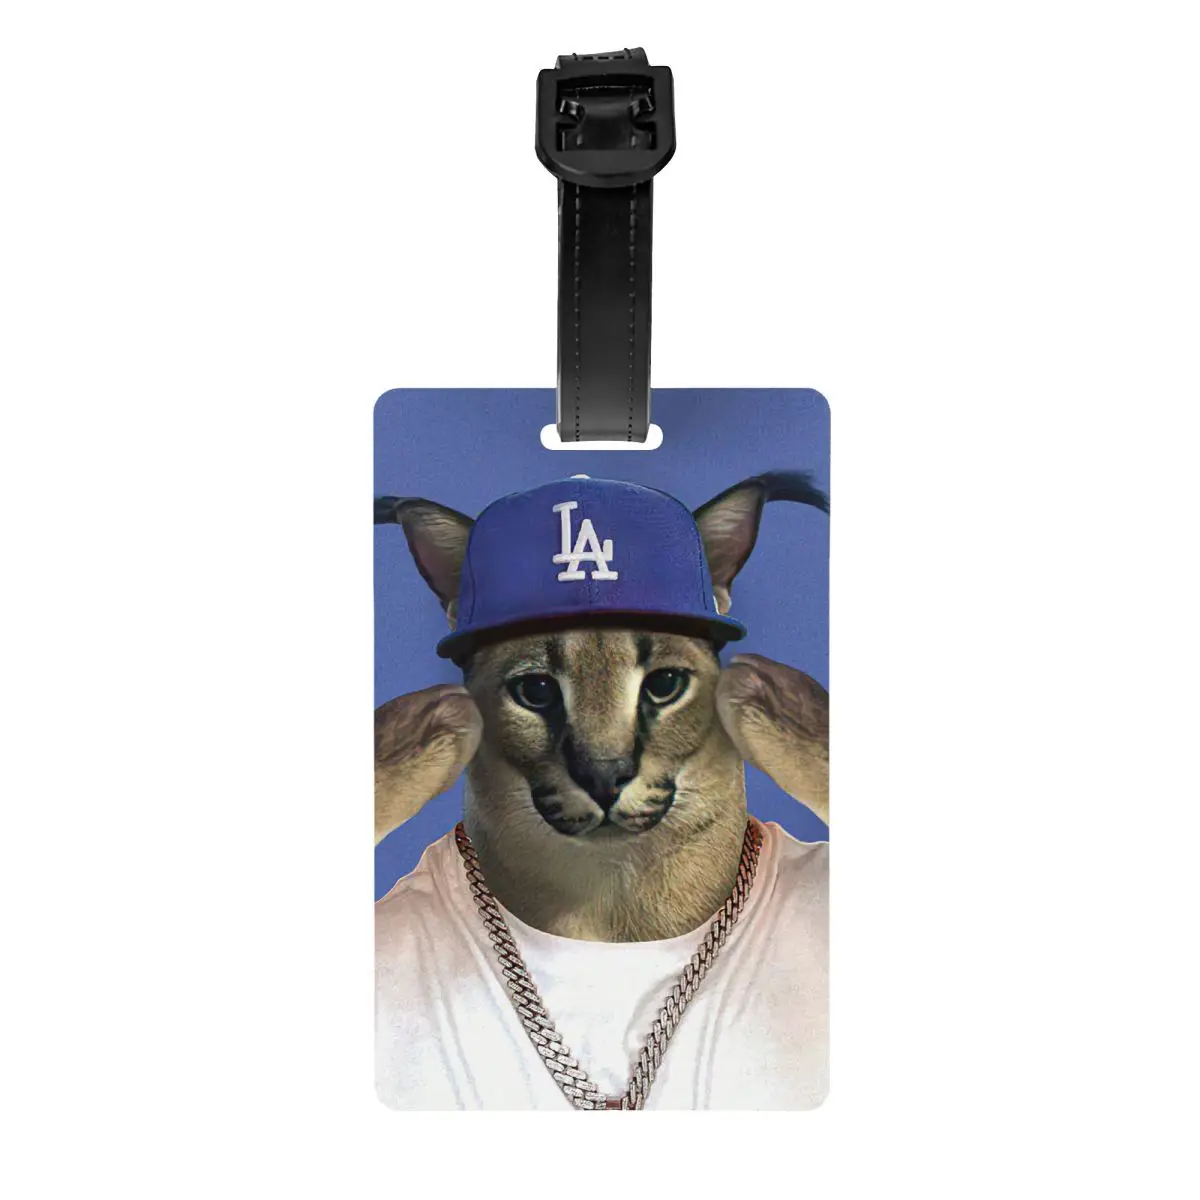 

Big Floppa Rapper Meme Luggage Tag for Suitcases Fashion Funny Caracal Cat Baggage Tags Privacy Cover Name ID Card